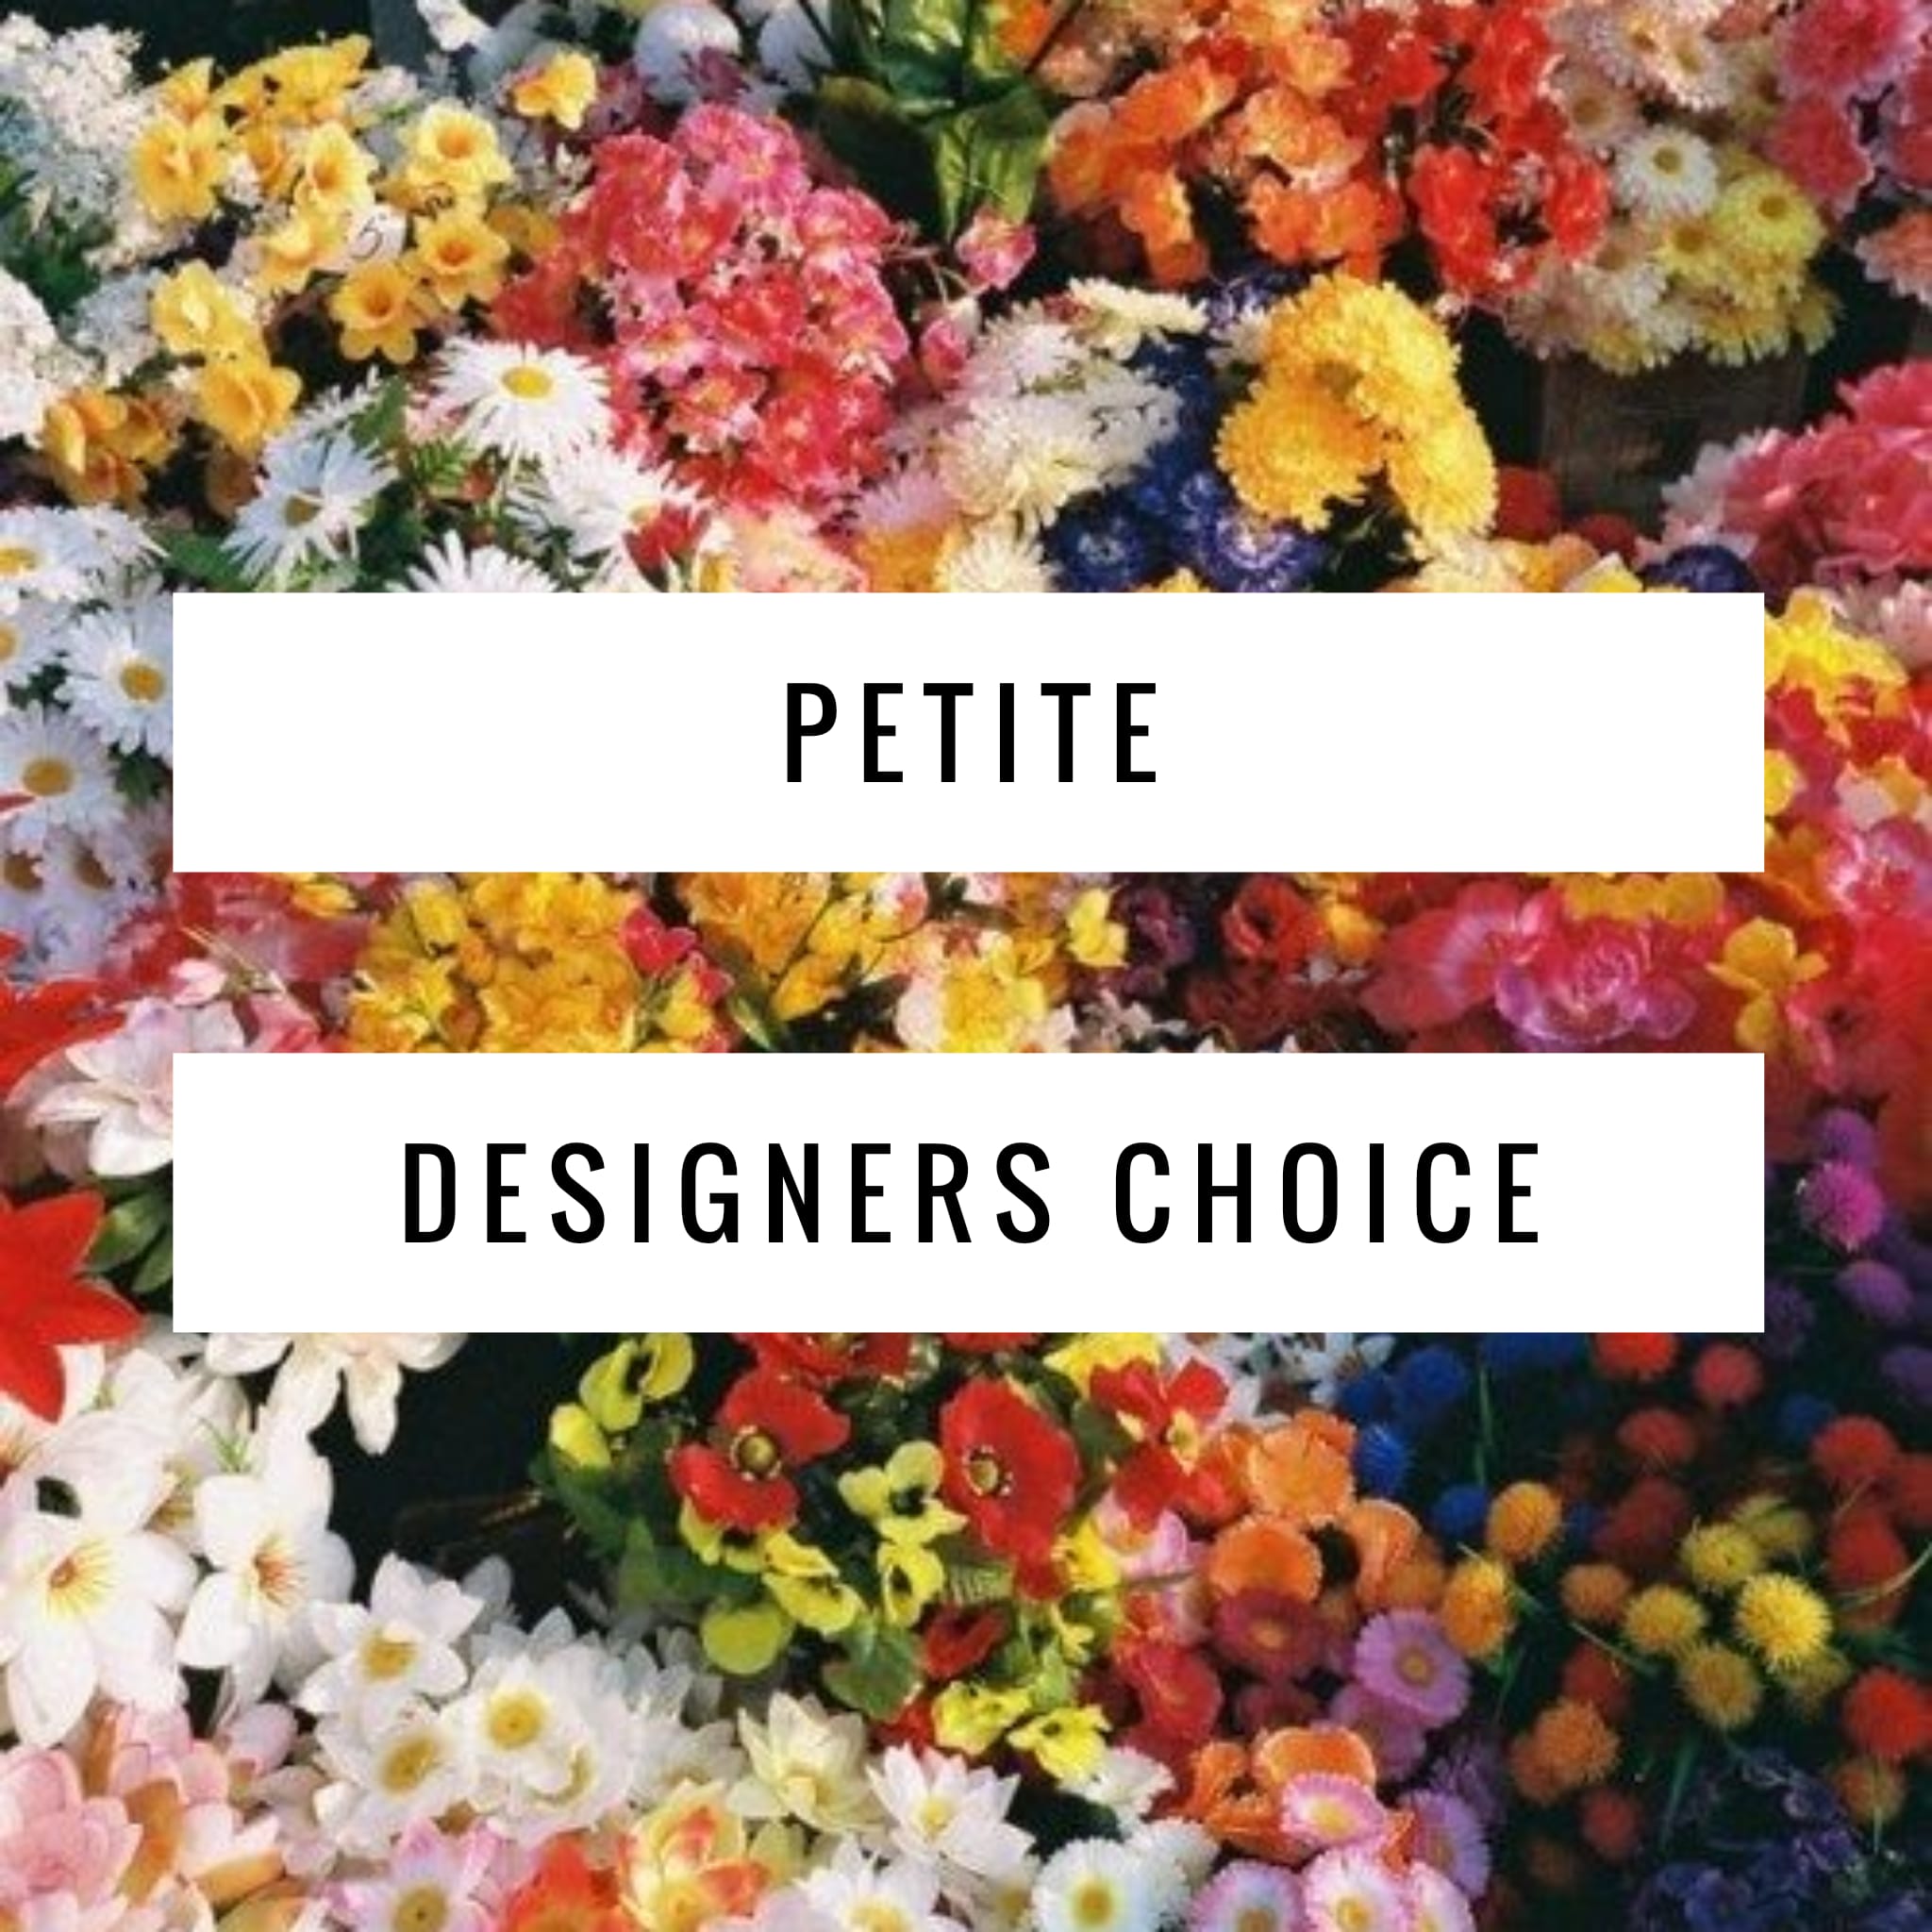 Petite Designers Choice - Send our petite designers choice as a &quot;little&quot; pick me up. Out florists use the freshest blooms available!